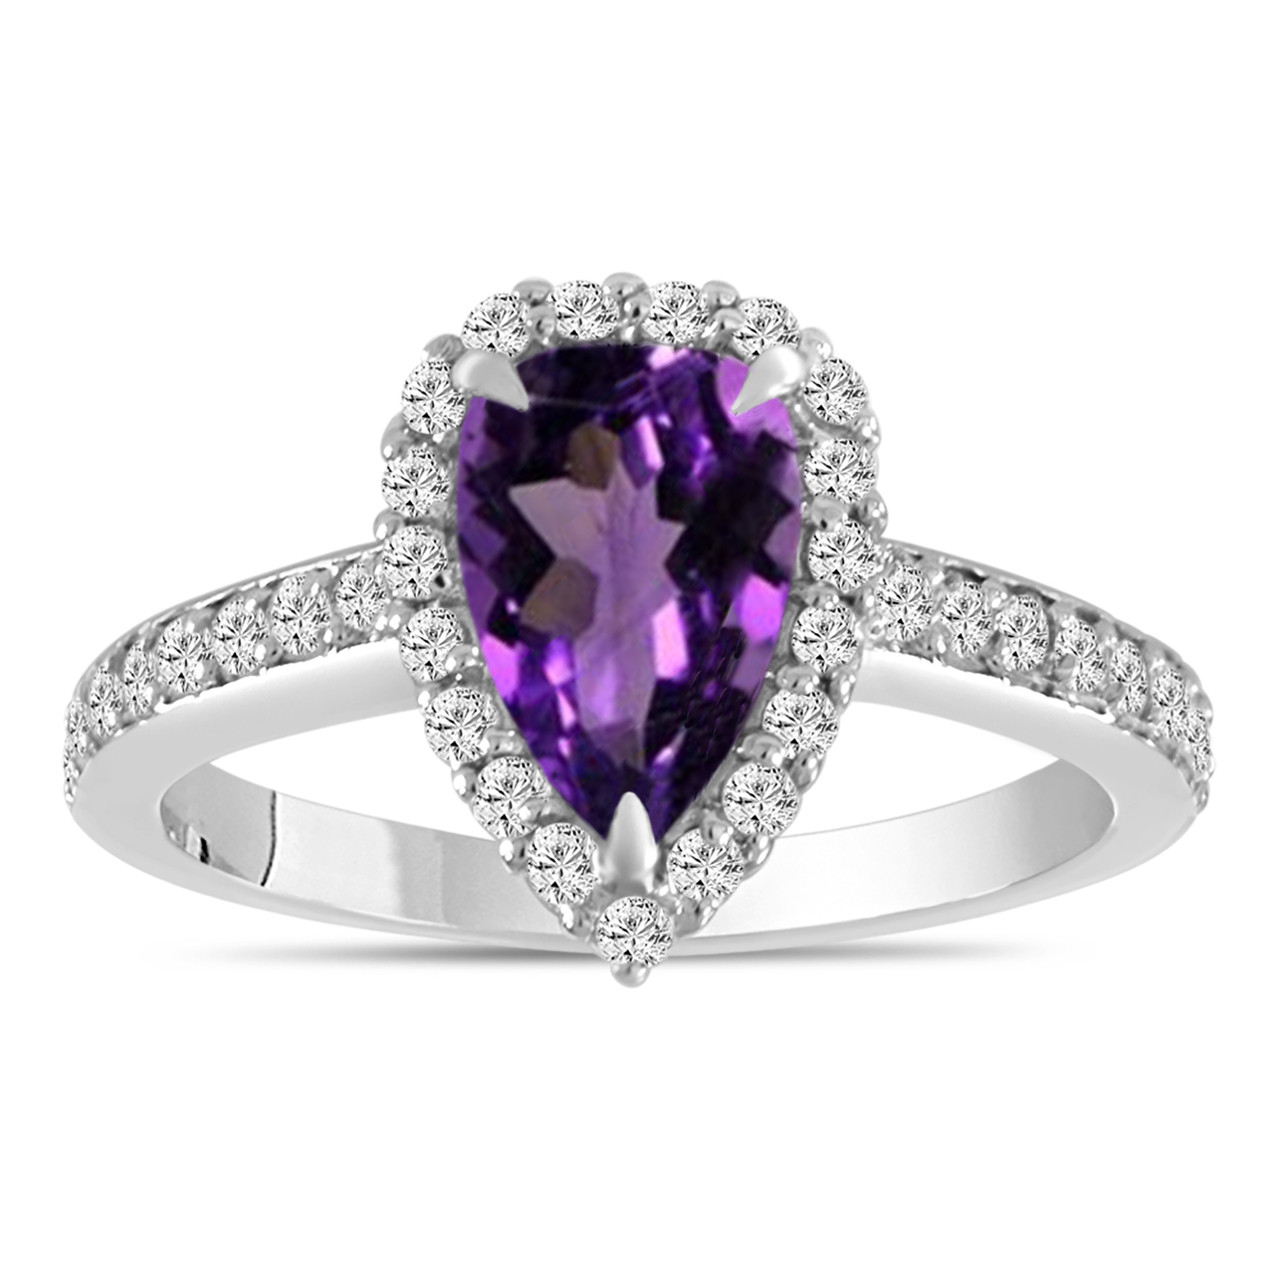 Pear Shaped Amethyst Engagement Ring 1.65 Carat 14k White Gold Unique ...